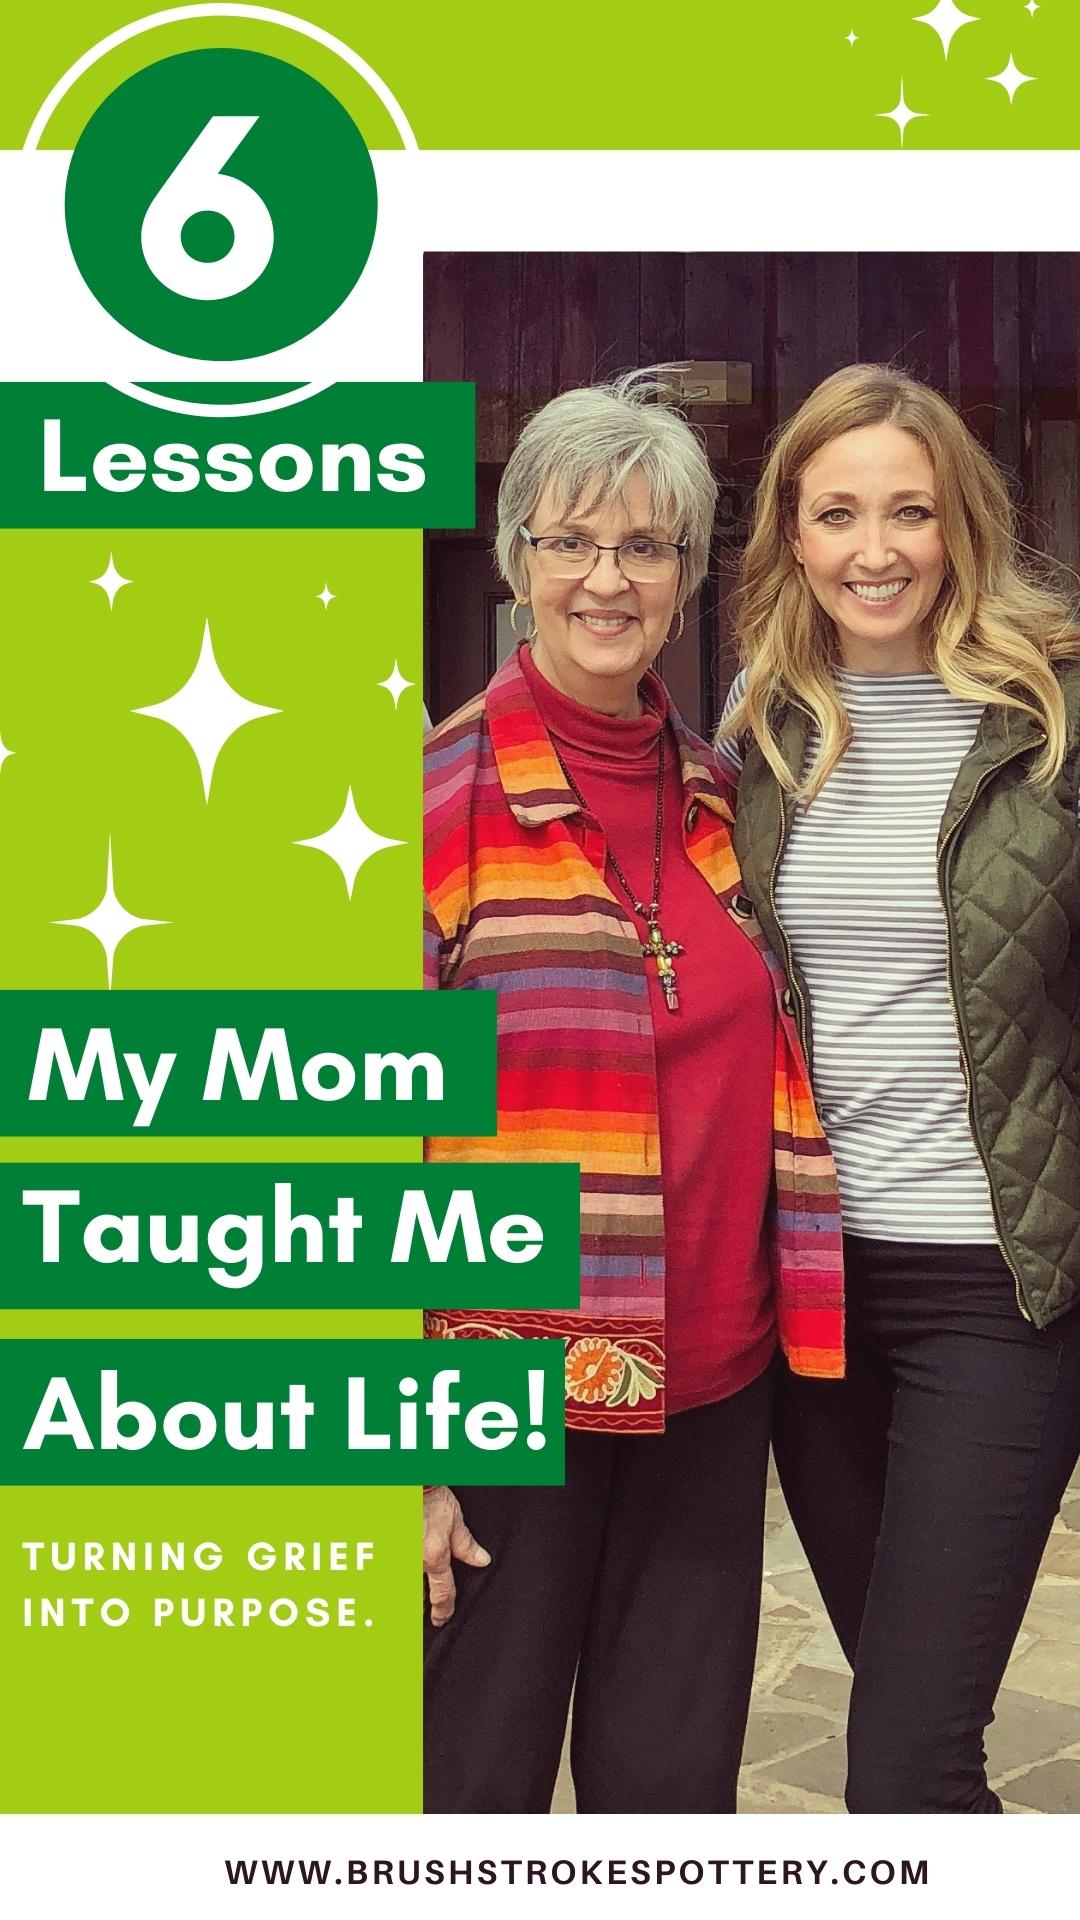 Turning grief into purpose - Lessons from Mom